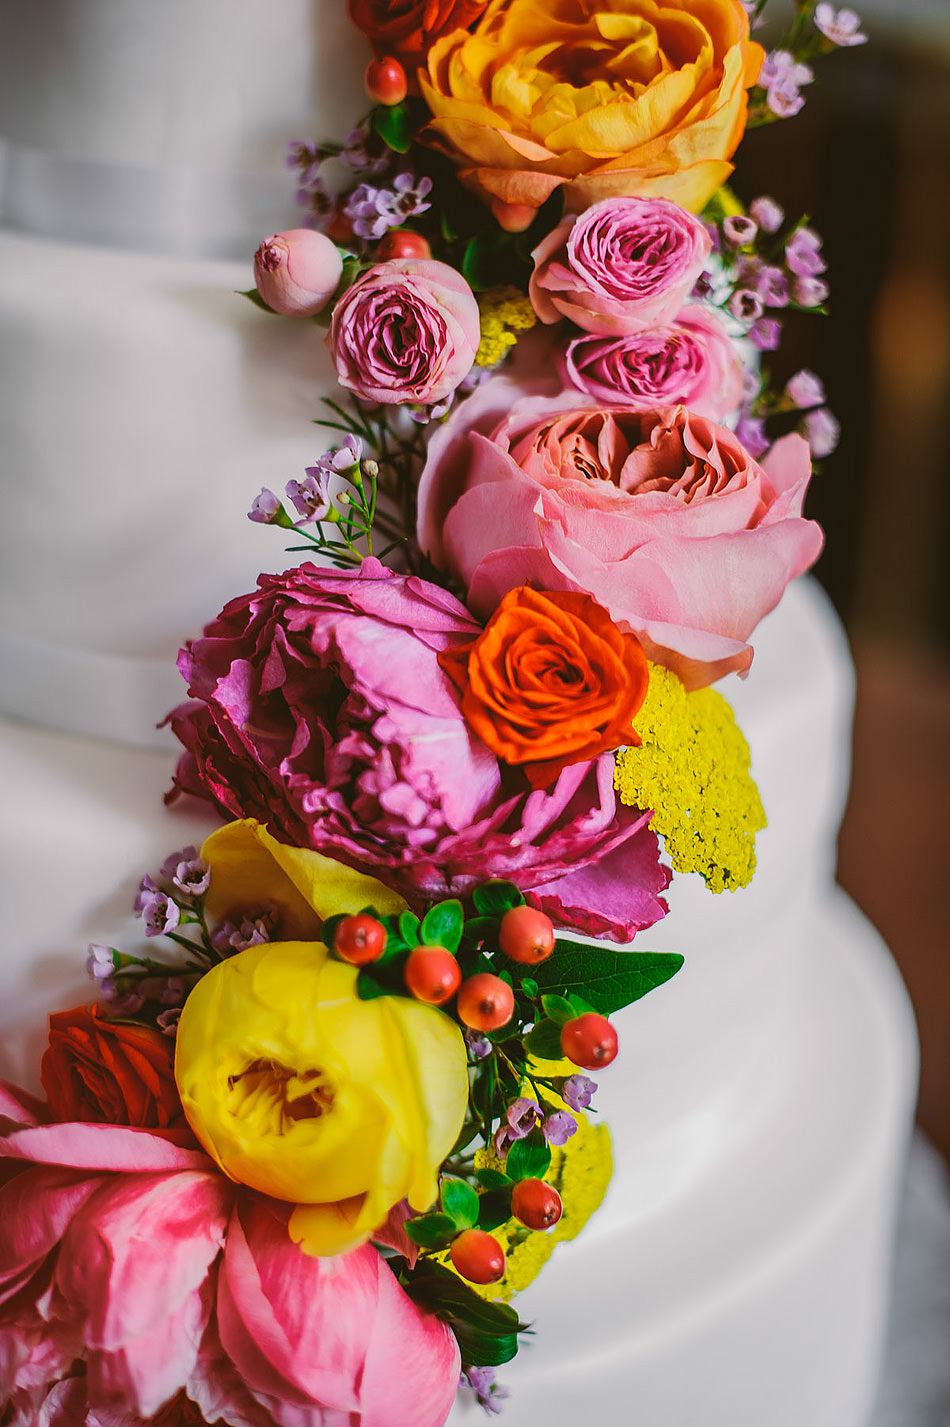 wedding cake with colorful cascading flowers1